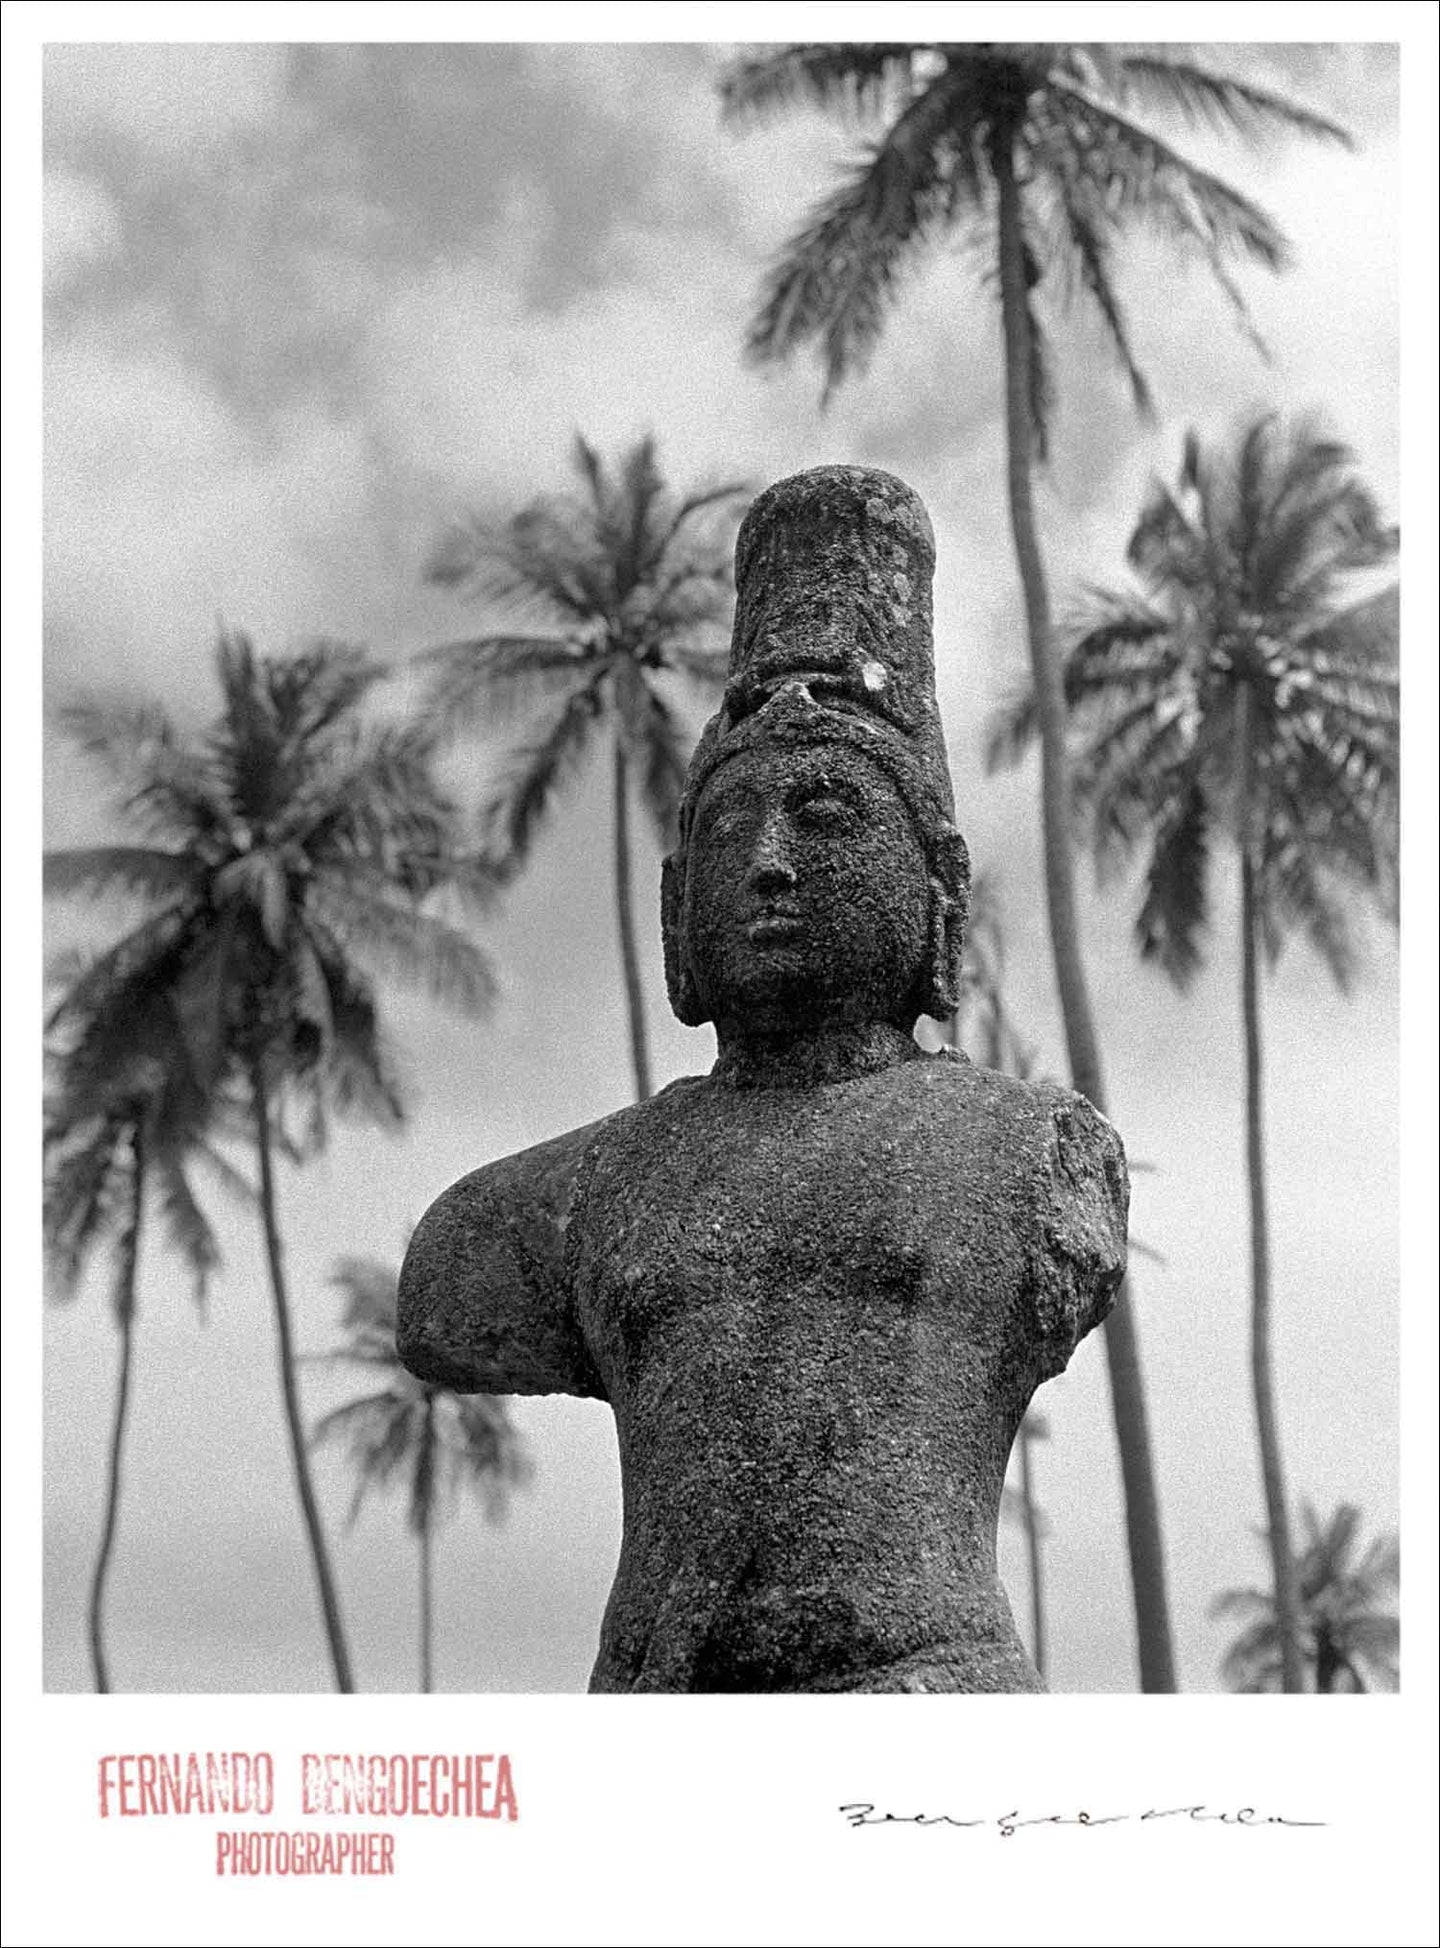 BURMA BEACH STATUE - Giclee Print - Stamped and Signed